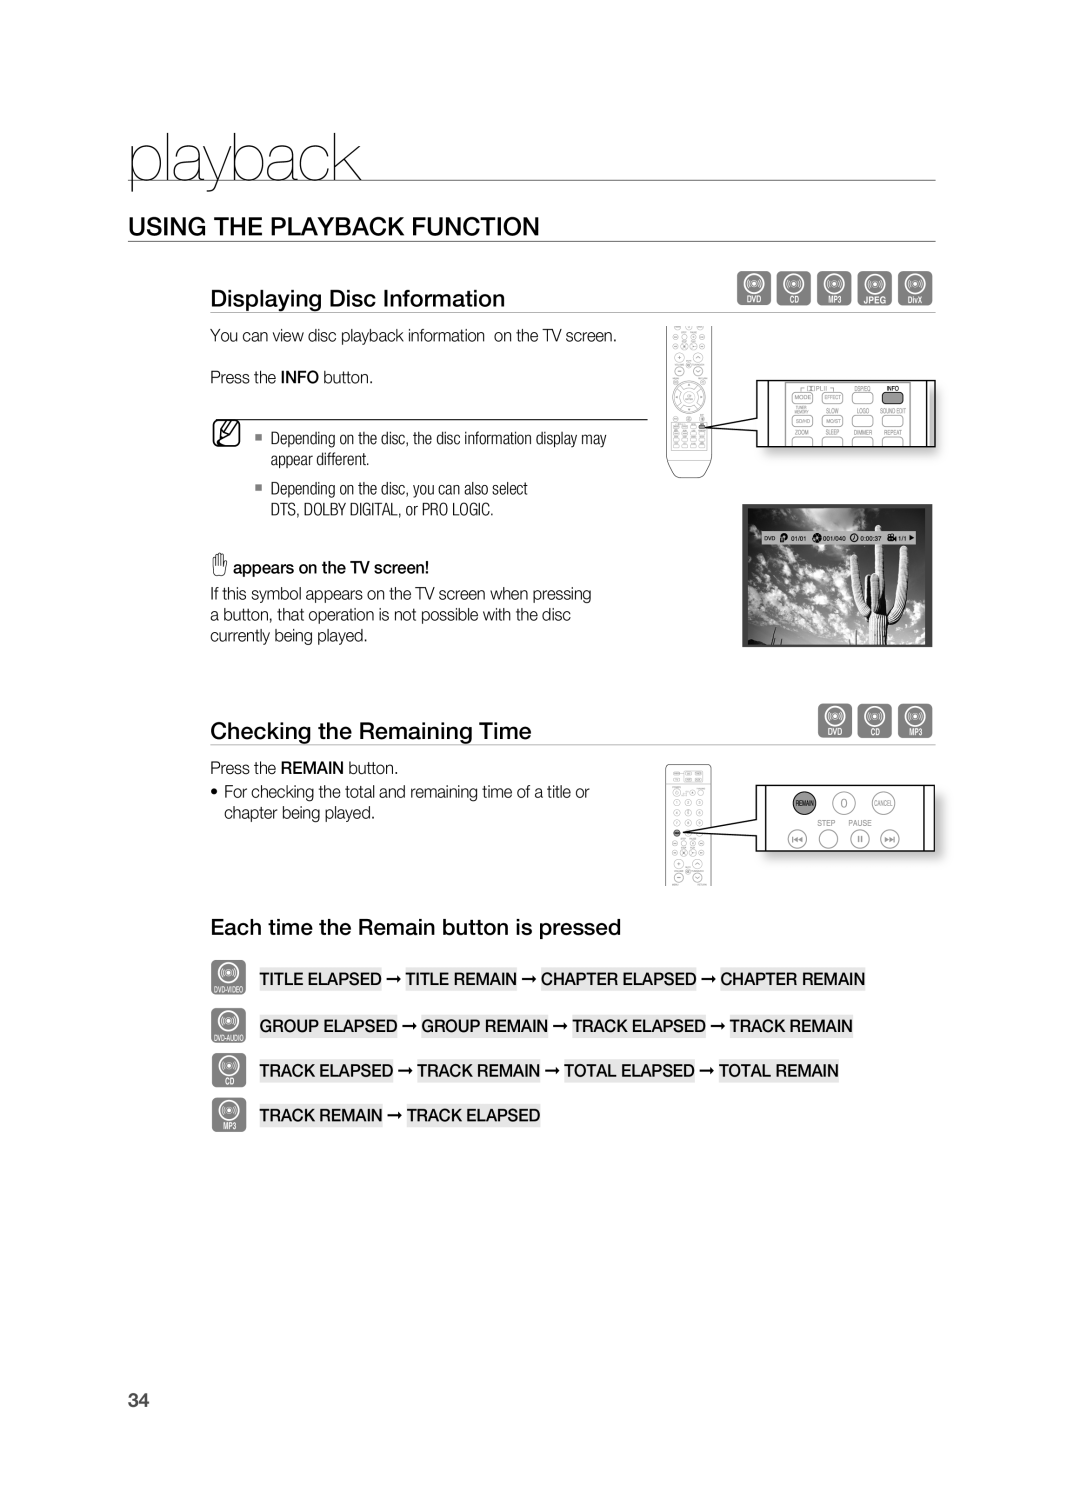 Samsung HT-TX715 user manual Bagd, Using The Playback Function, playback, Each time the remain button is pressed 